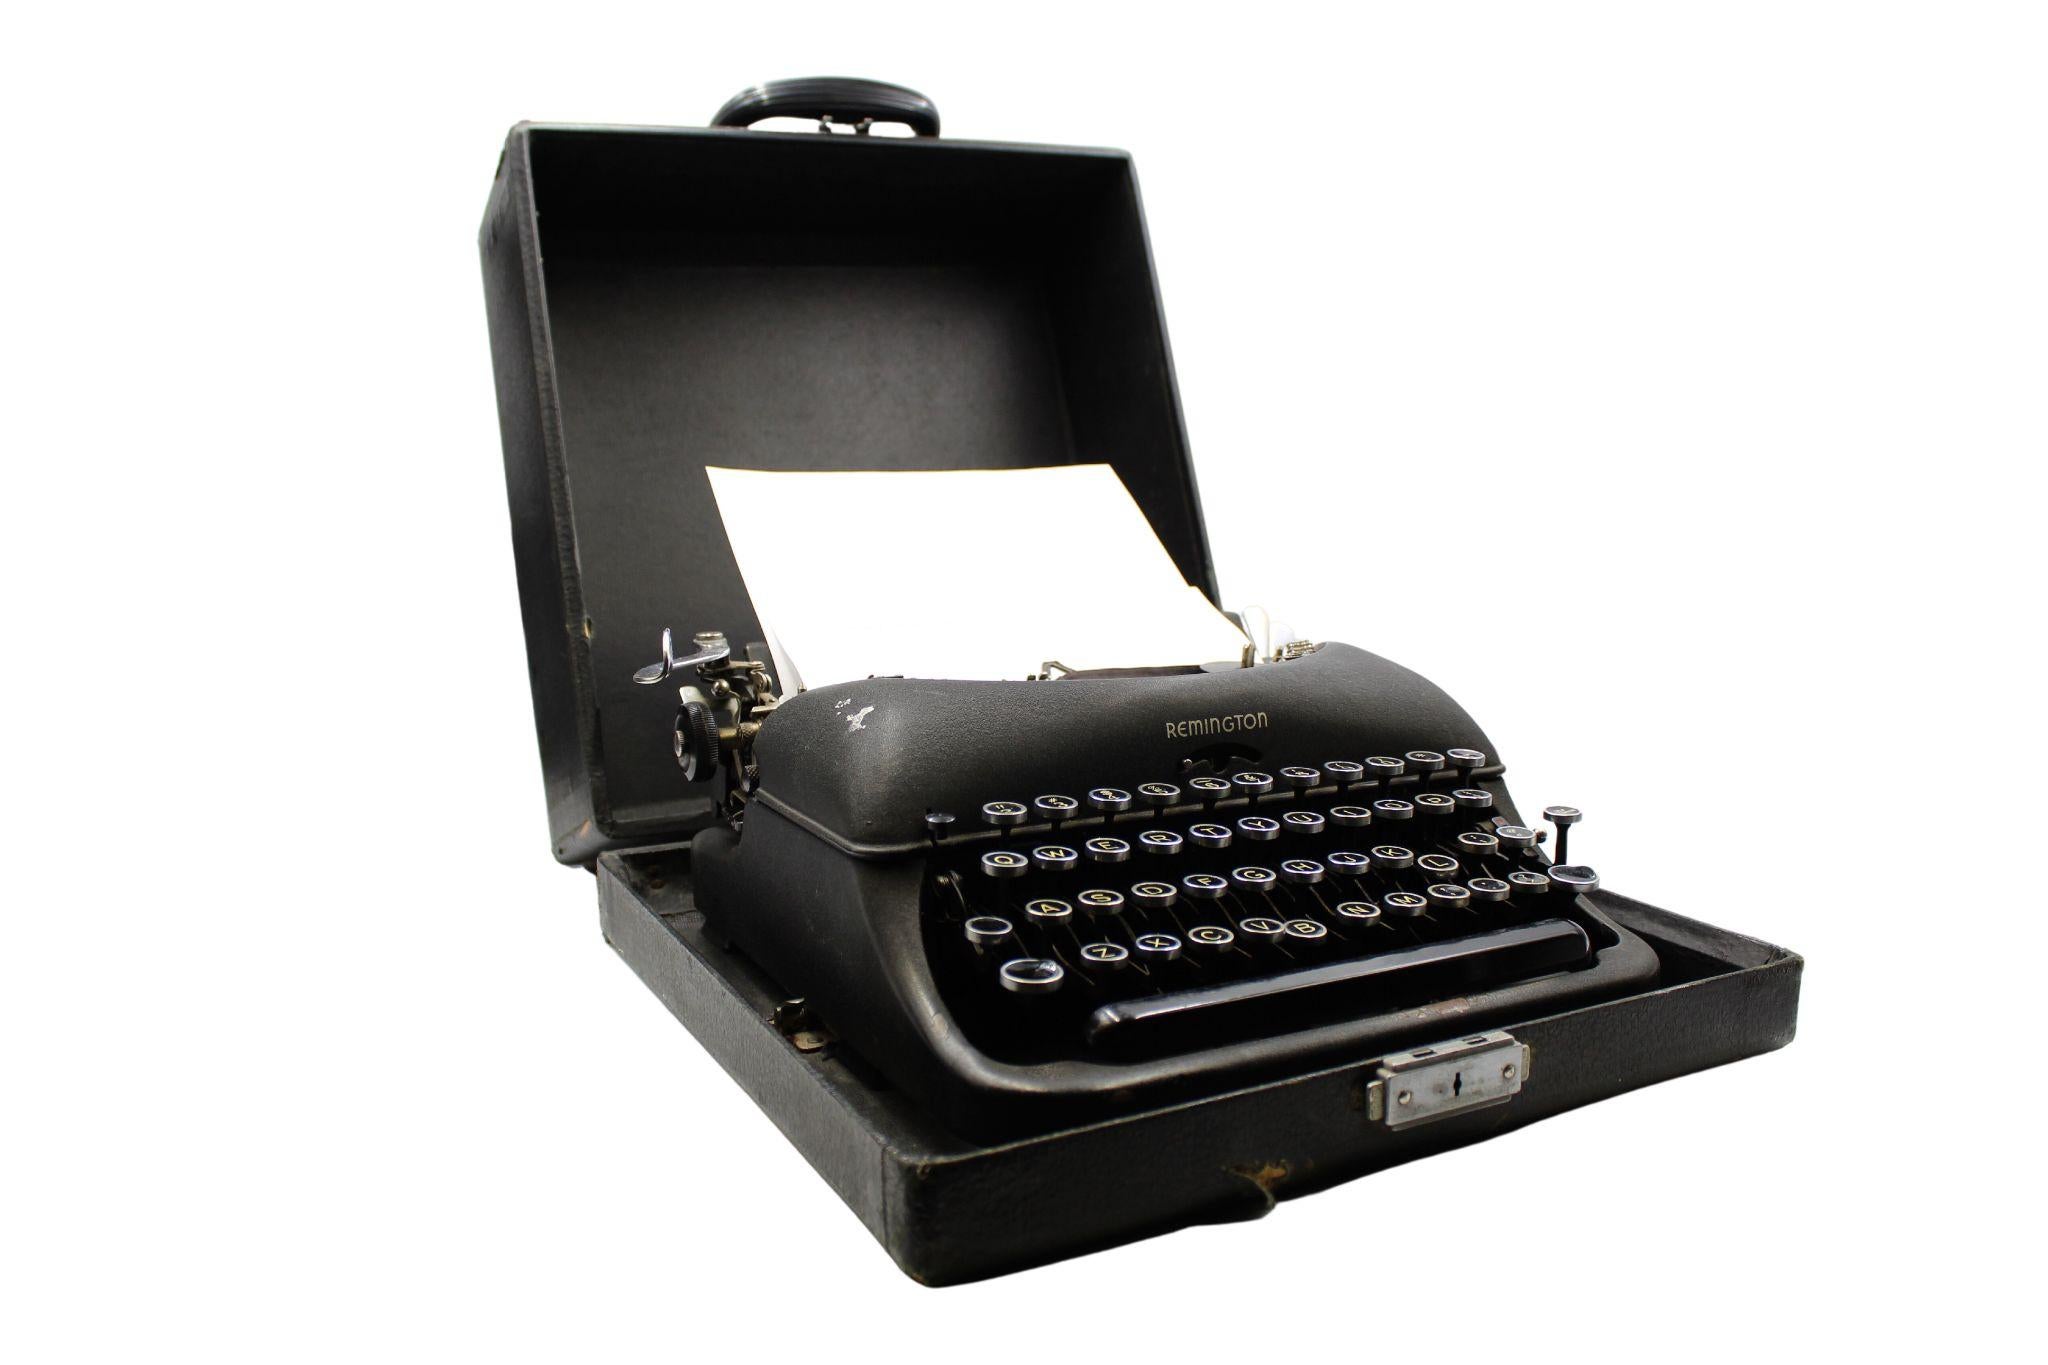 Presented is a vintage Remington Rand typewriter from 1947.  The typewriter is the portable De Luxe Model 5, issued in a sleek carrying case. Still functional, this classic design features a black crinkle finish, and a QWERTY keyboard. Included in